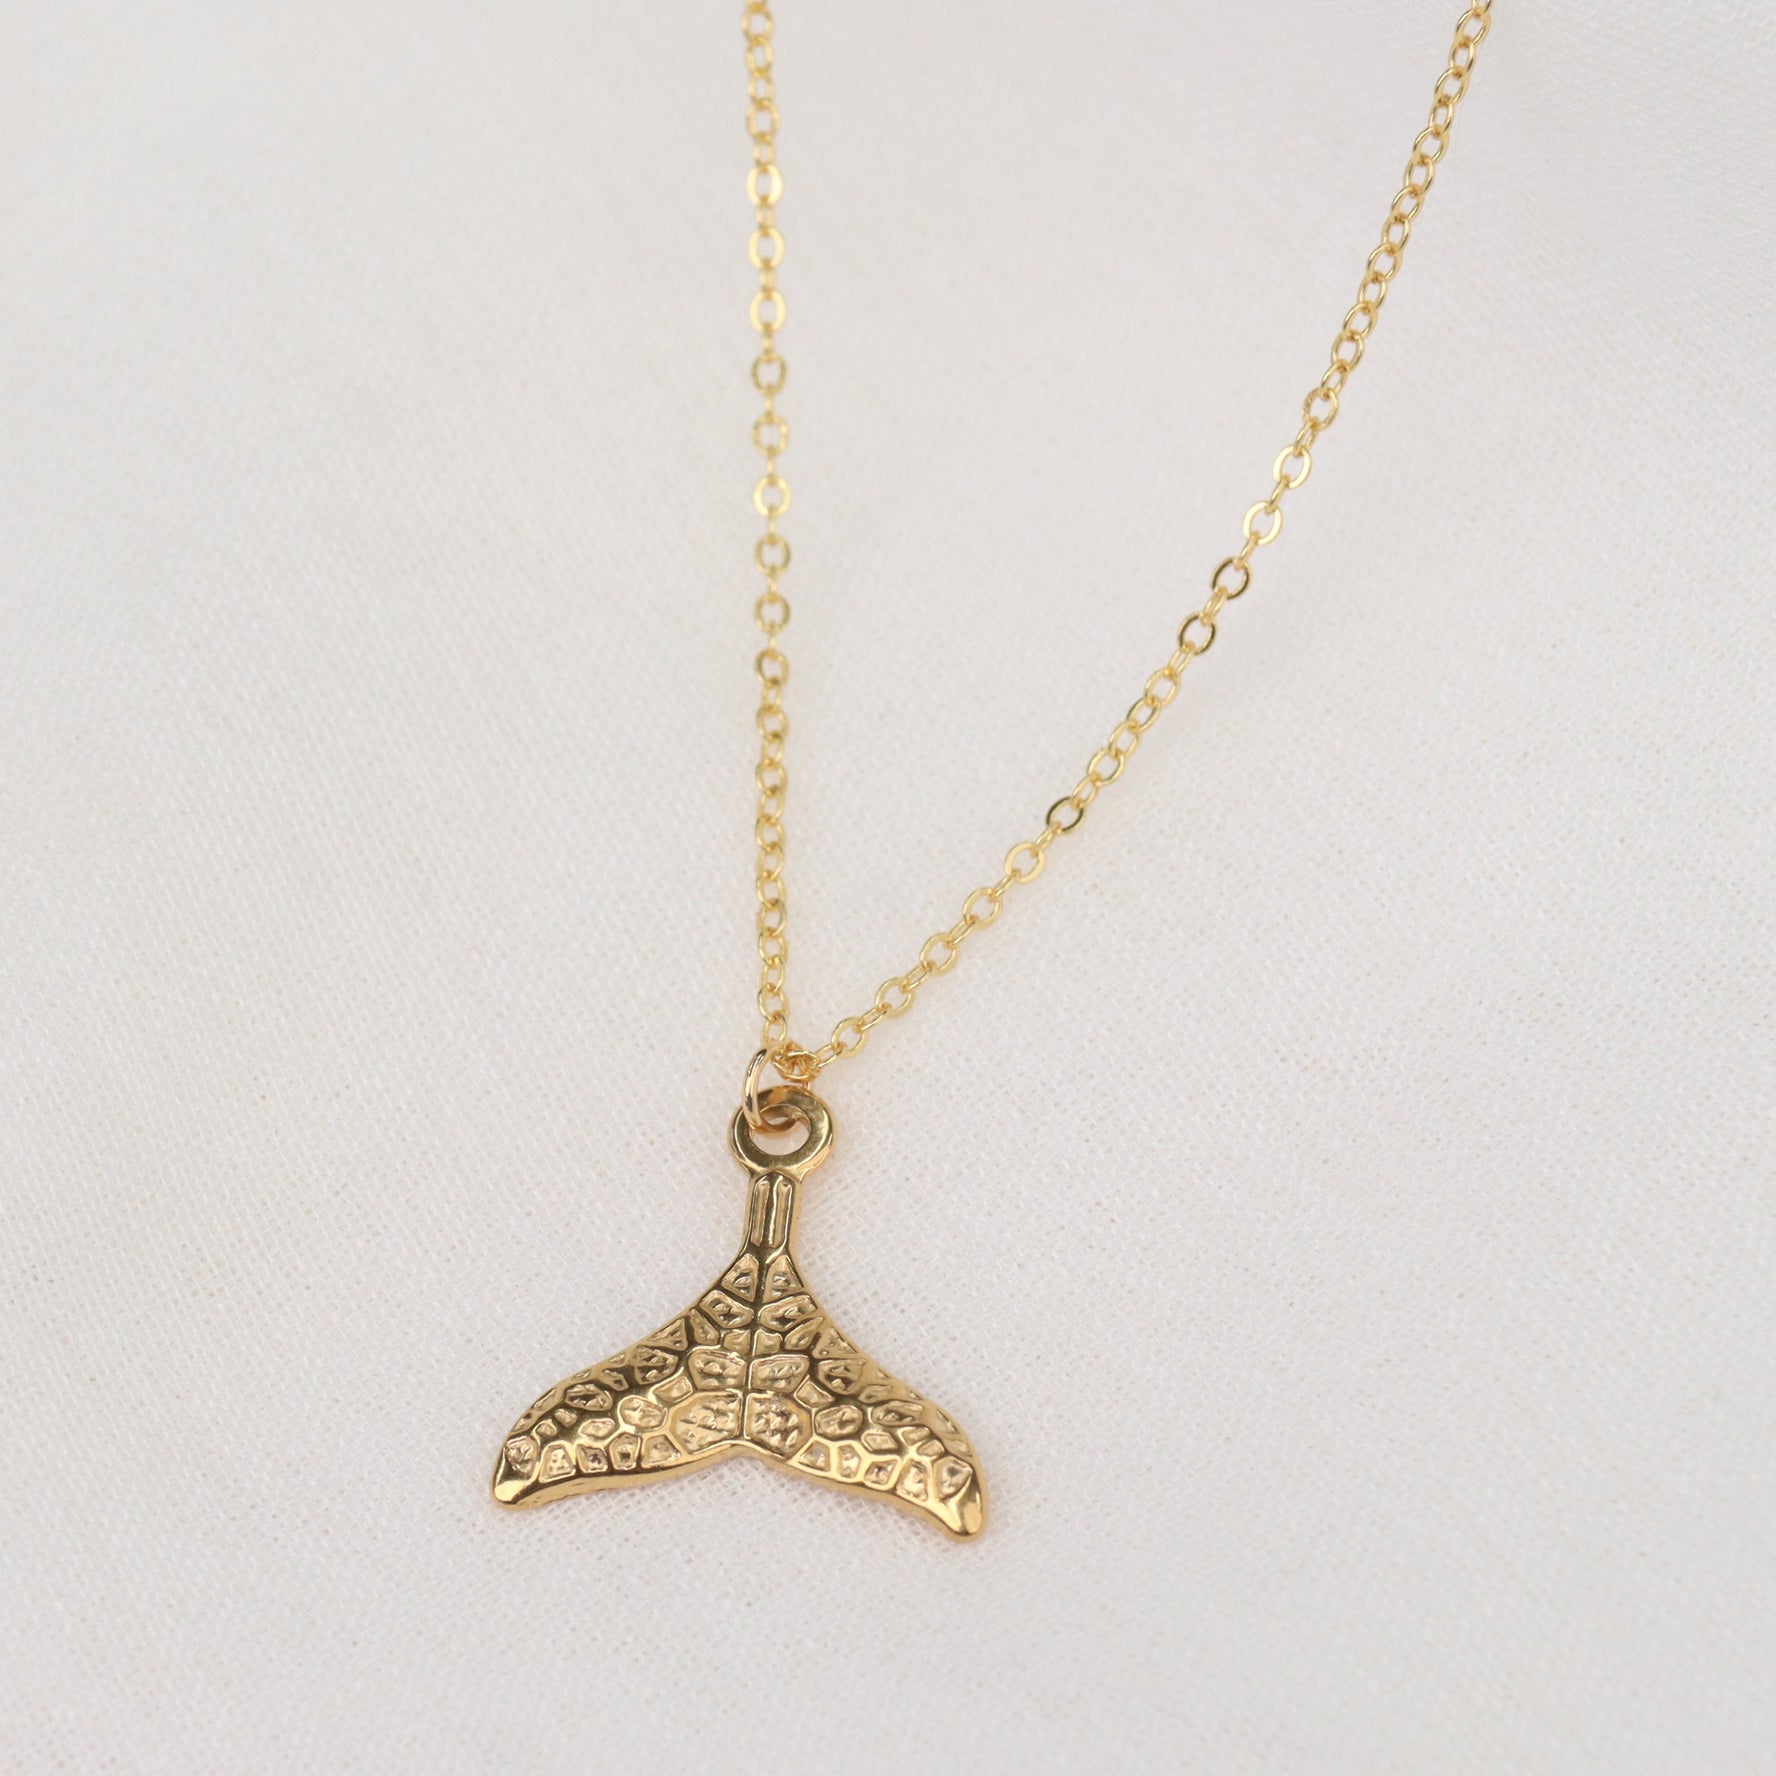 Sipadam | 18k Gold Plated or Sterling Silver Textured Whale Tale Pendant Necklace